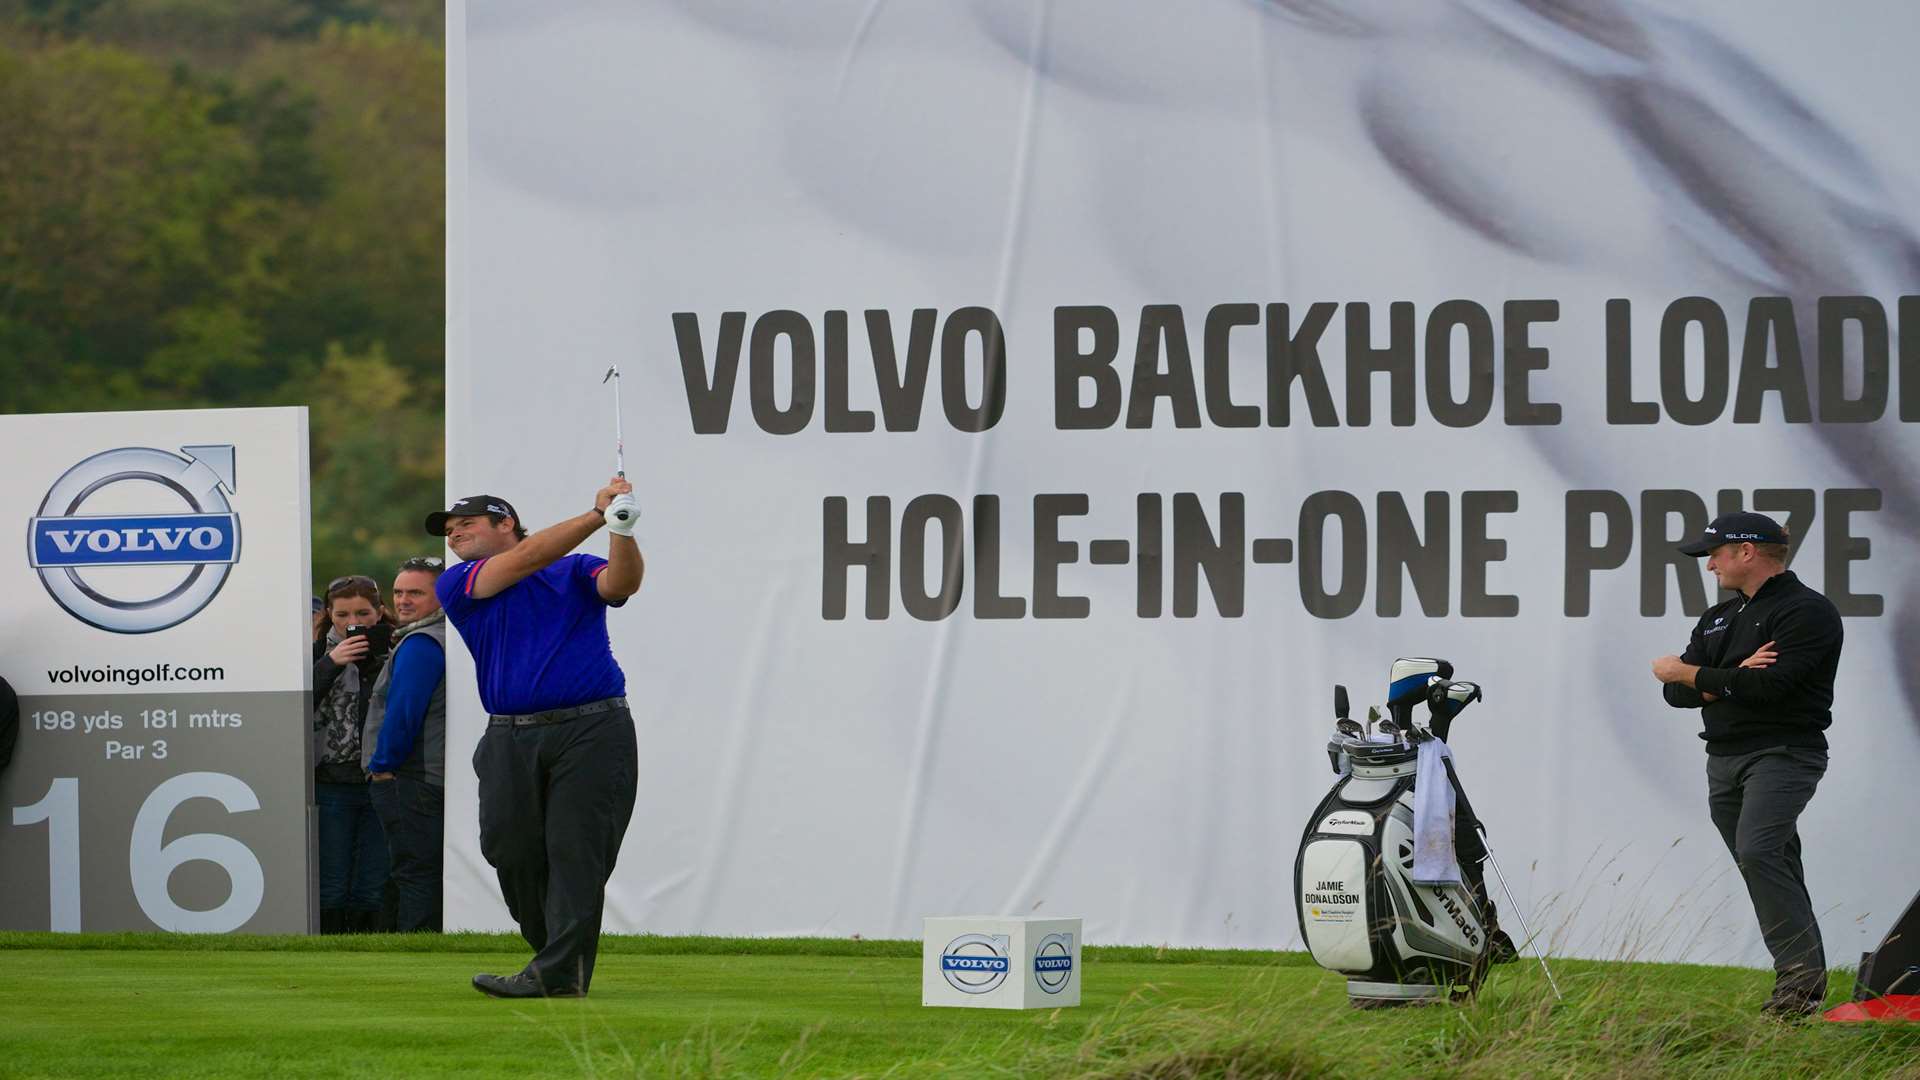 Patrick Reed tees off as Jamie Donaldson watches on Picture: Volvo in Golf